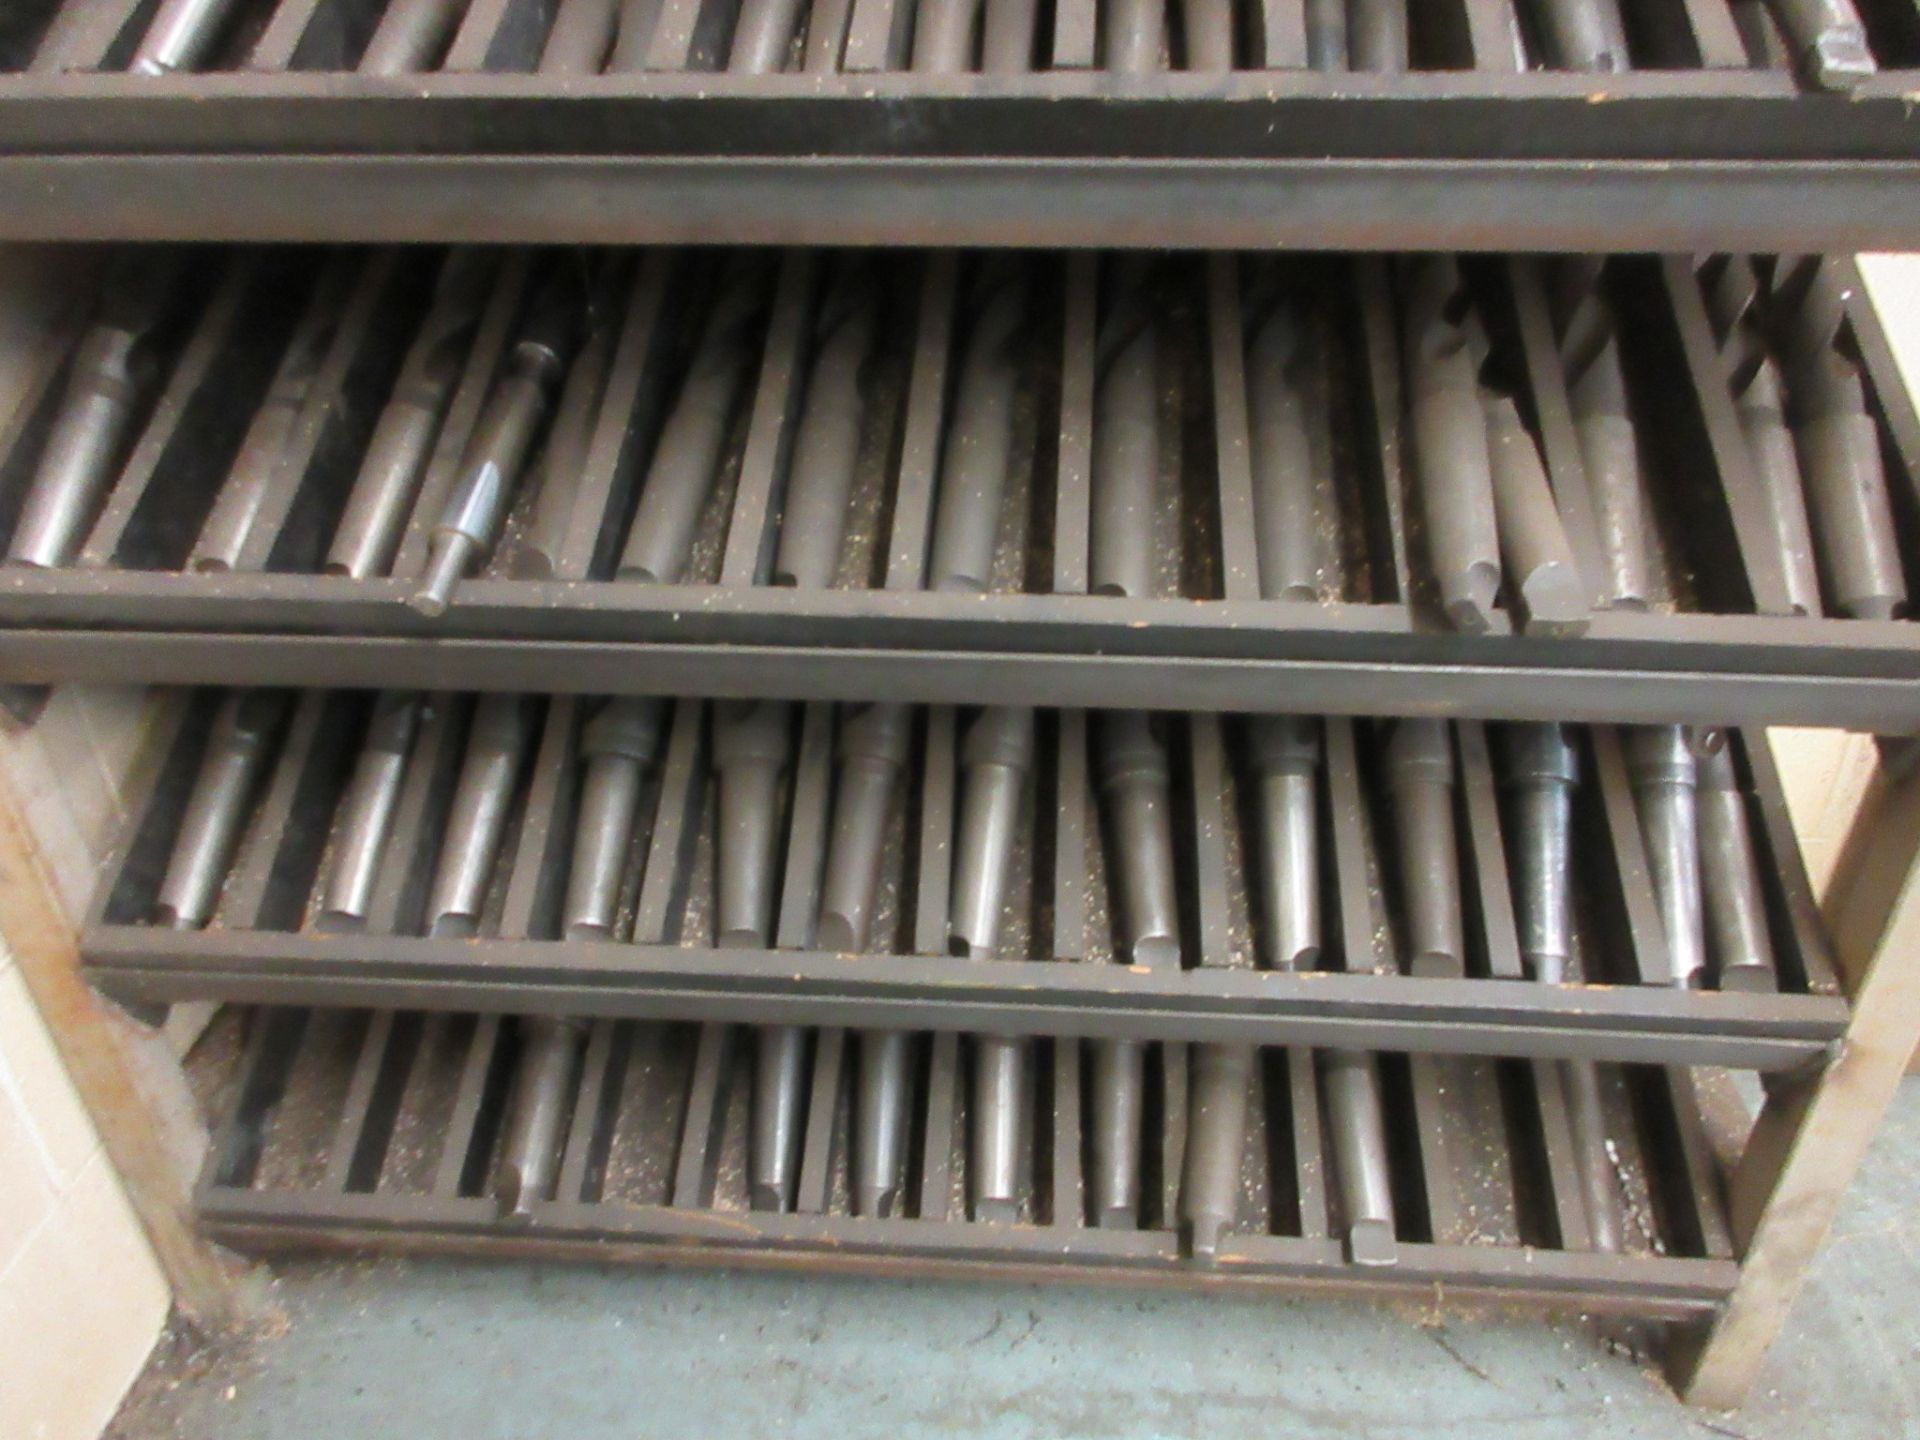 5-LEVEL DRILL BIT STORAGE CABINET (12 SLOTS PER LEVEL = 60 TOTAL SLOTS) W/ DRILLS AND BORING DRILLS, - Image 4 of 6